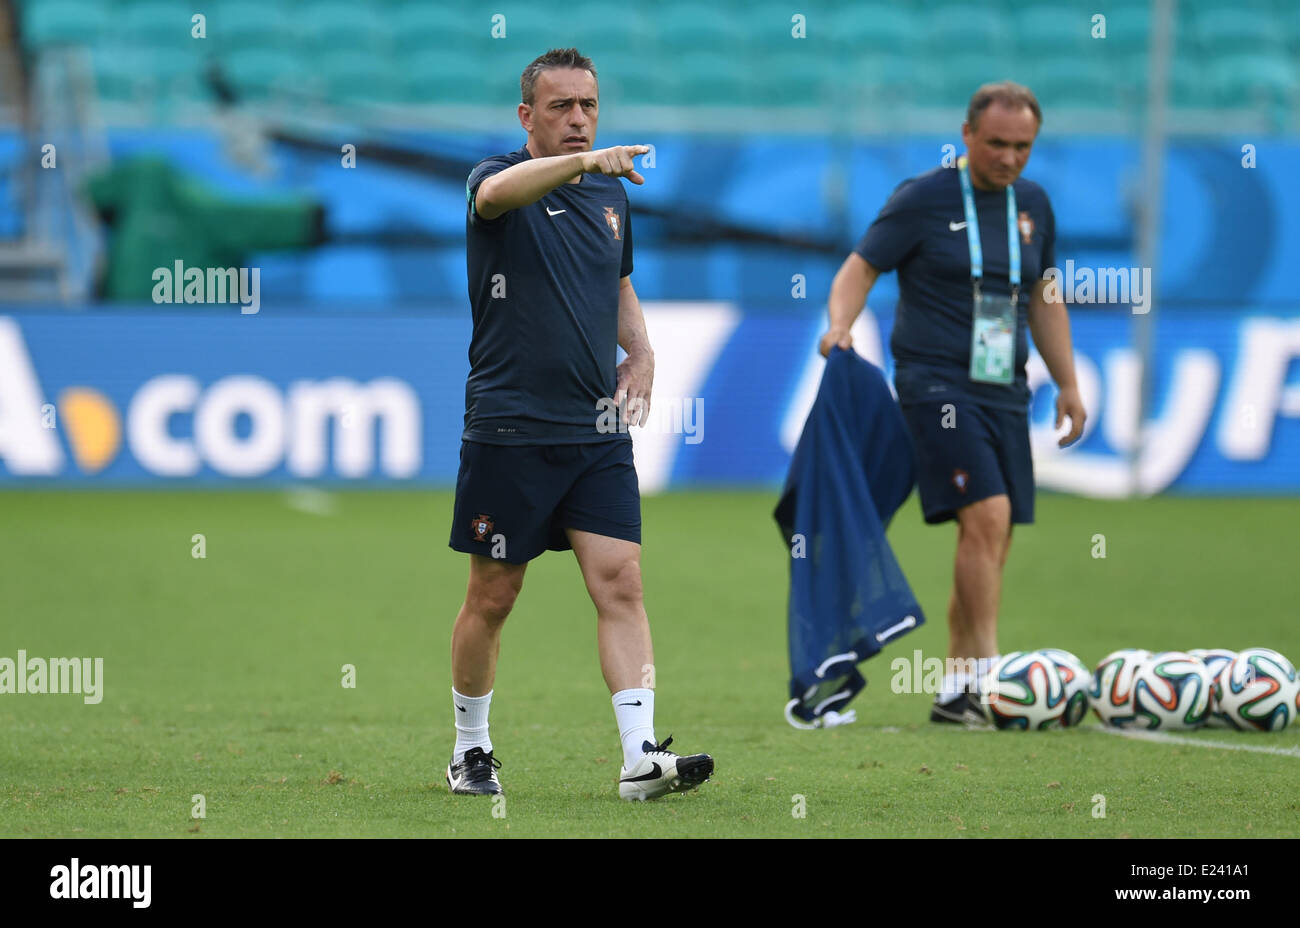 Salvador da Bahia, Brazil. 15th June, 2014. Head coach Paulo Bento (L) gestures during a training session of the Portugal's national soccer team at the Arena Fonte Nova Stadium in Salvador da Bahia, Brazil, 15 June 2014. Germany will face Portugal in their group G preliminary round match at the FIFA World Cup 2014 on 16 June 2014 in Salvador da Bahia. Photo: Andreas Gebertt/dpaile alert services, downloa/Alamy Live News Stock Photo